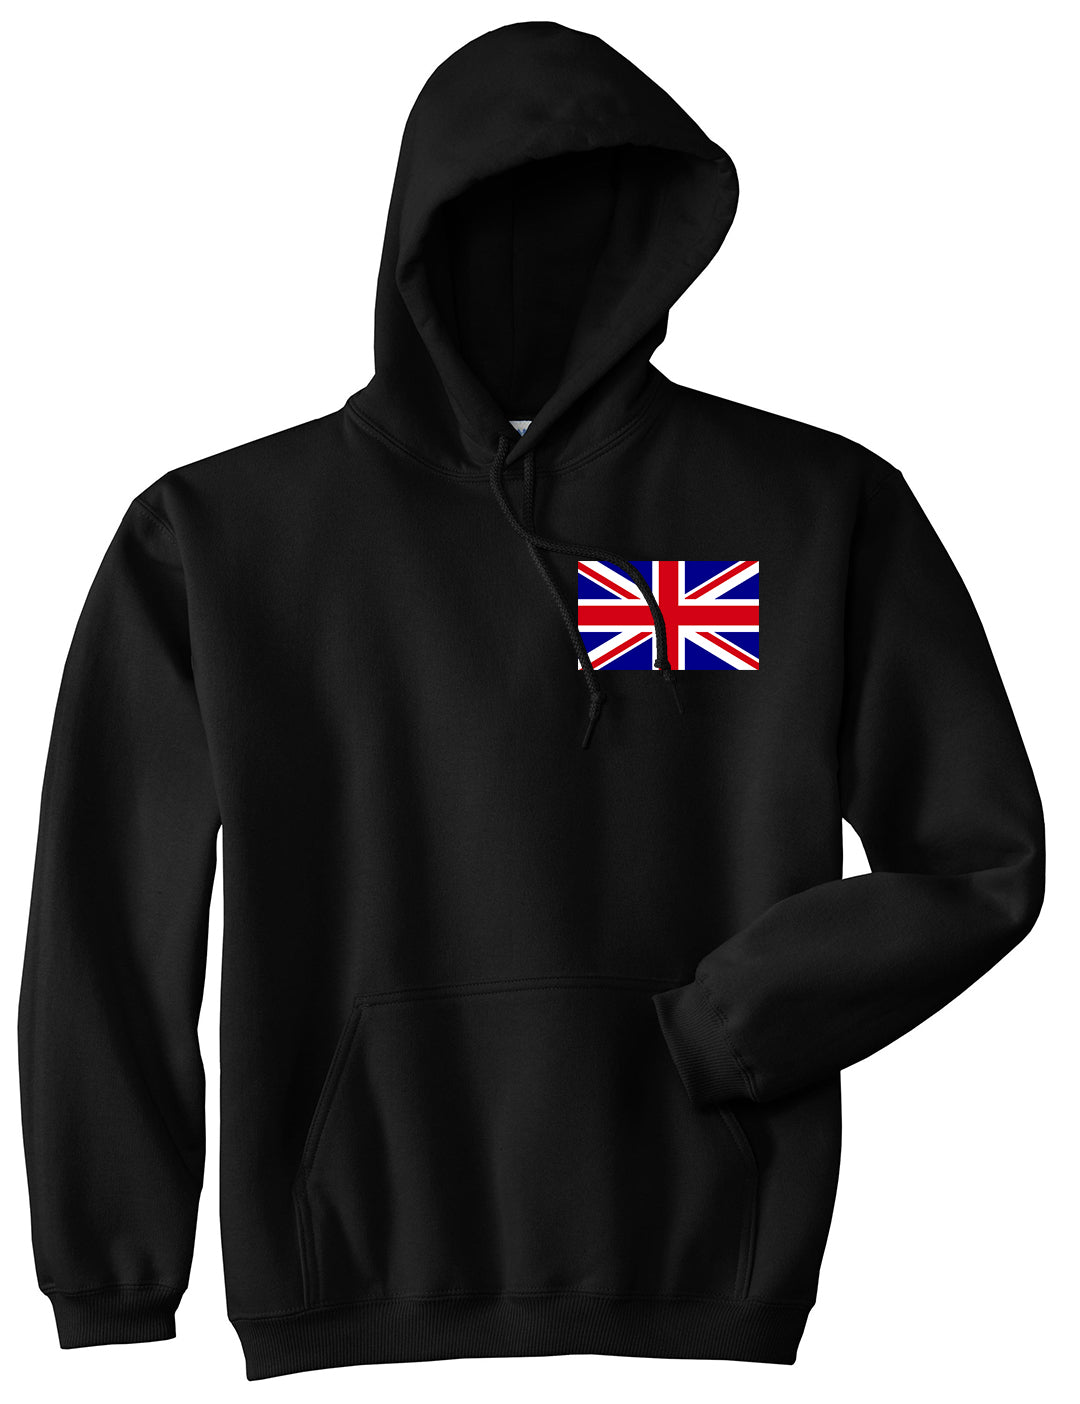 English England Flag Chest Mens Black Pullover Hoodie by KINGS OF NY